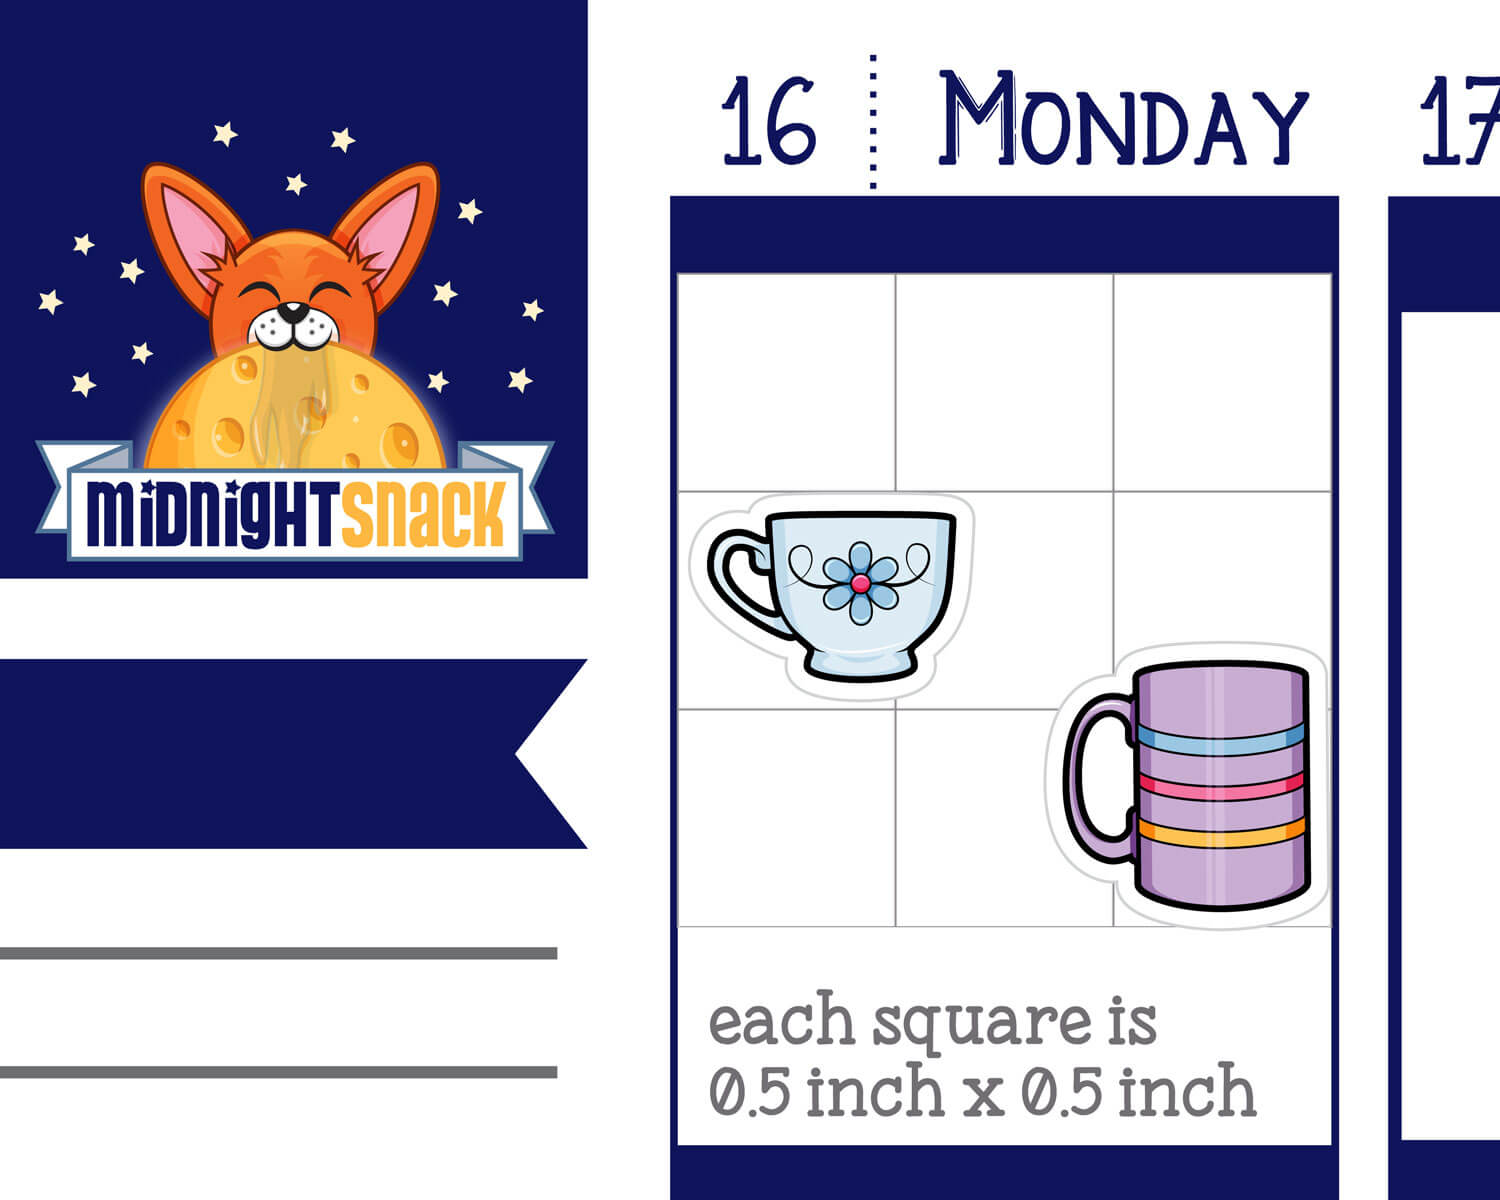 Coffee Mug or Tea Cup Sampler Planner Stickers from Midnight Snack Planner